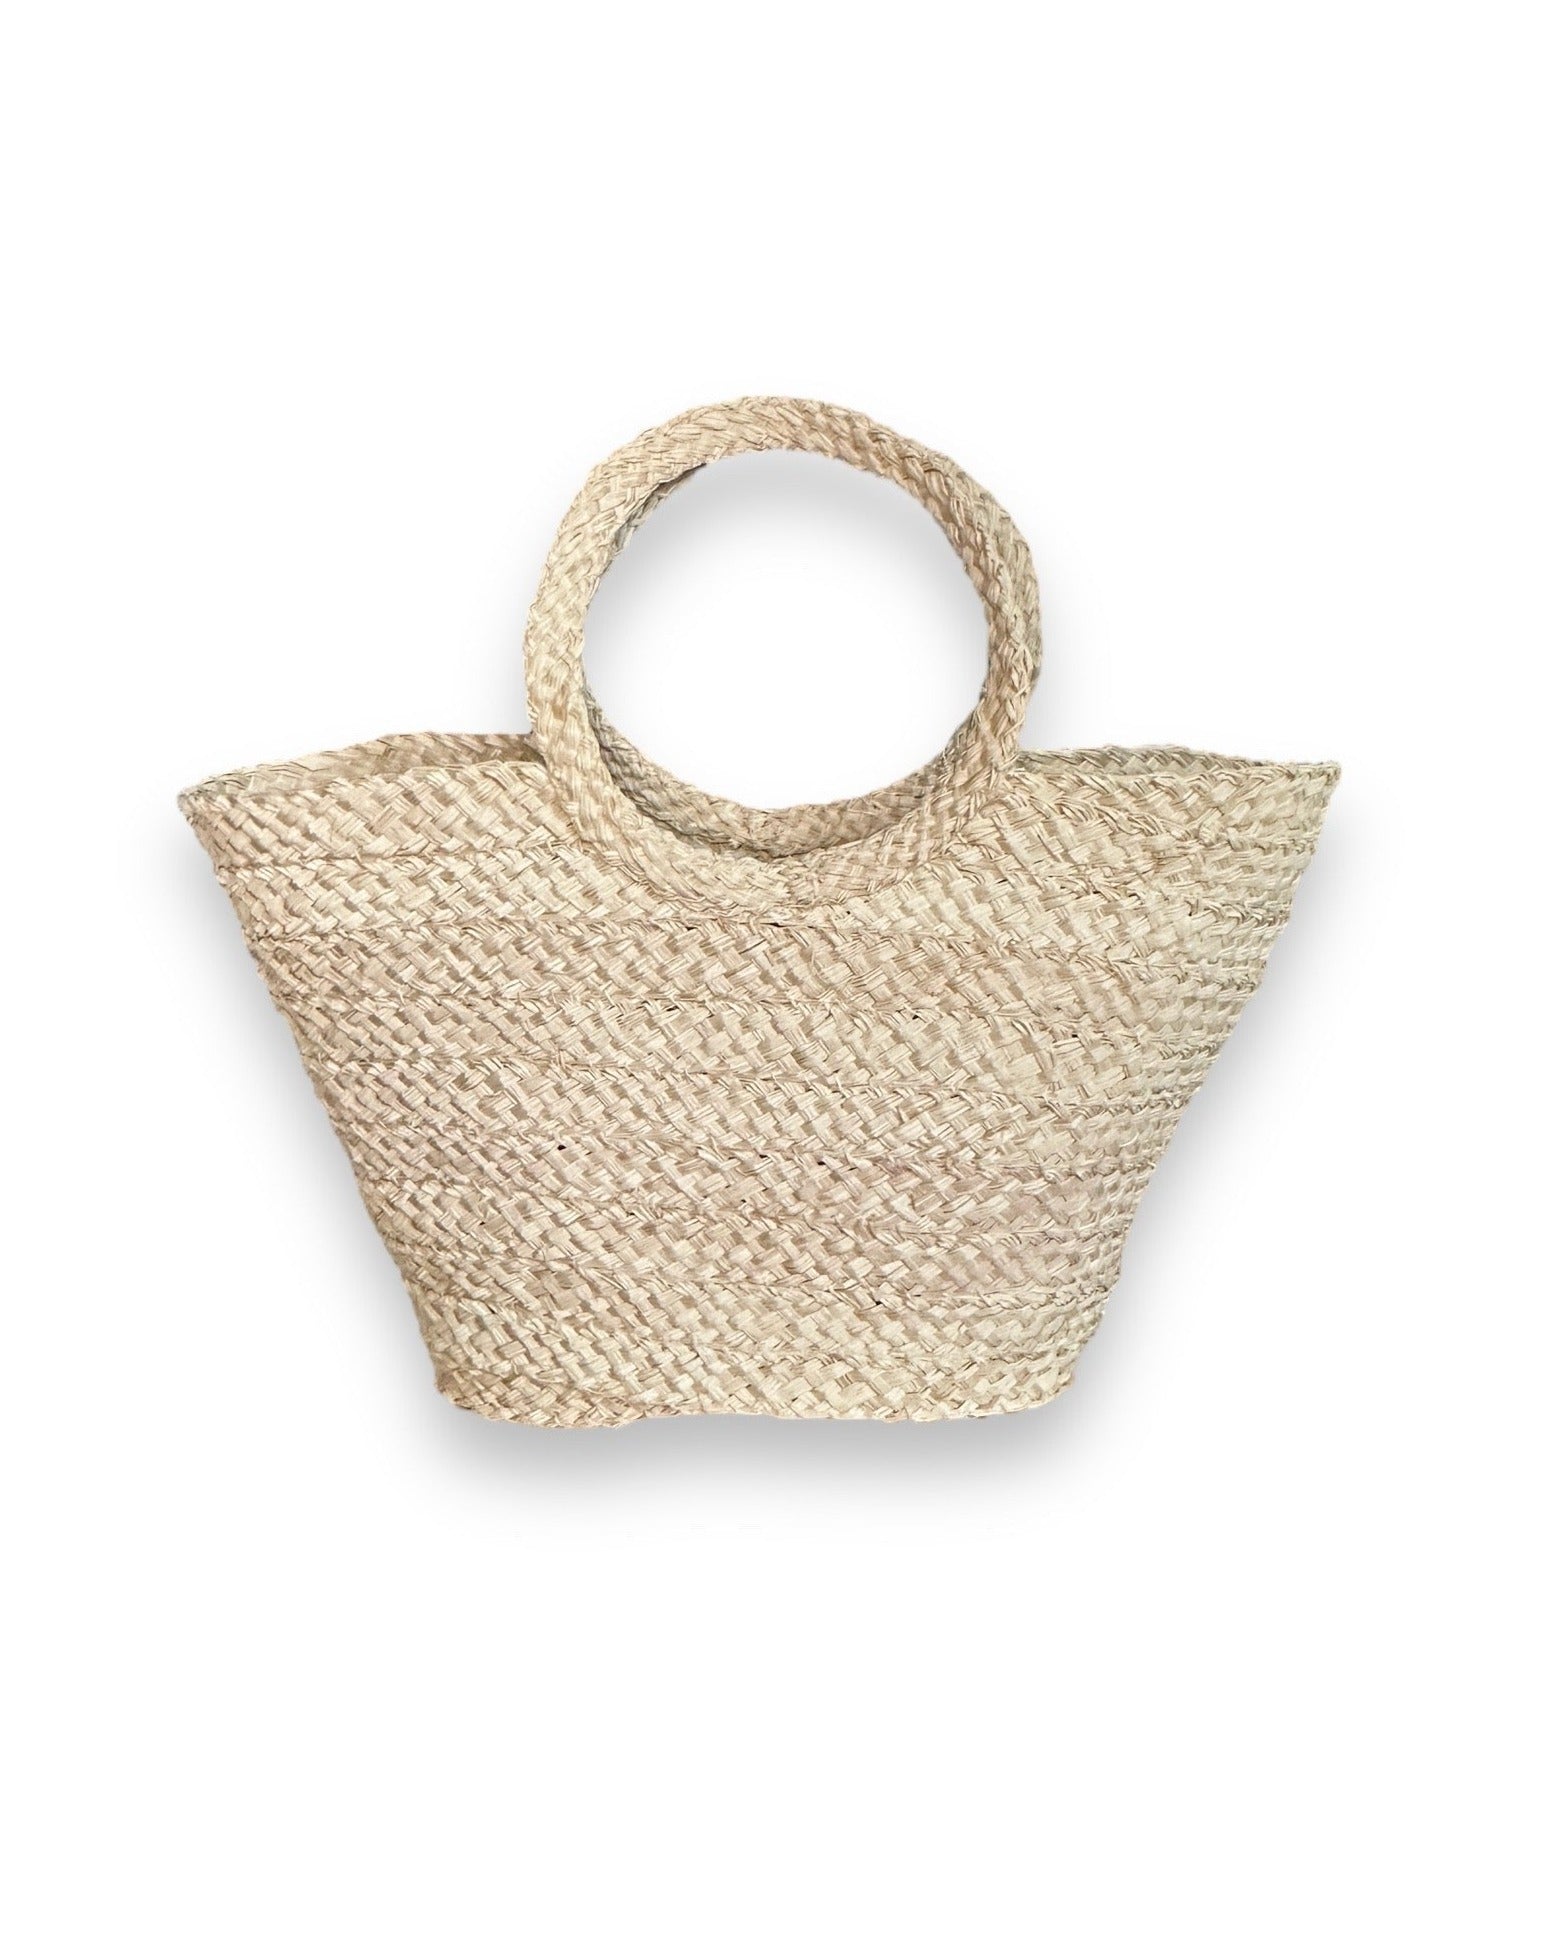 Straw tote-perfect for beach, park or shopping